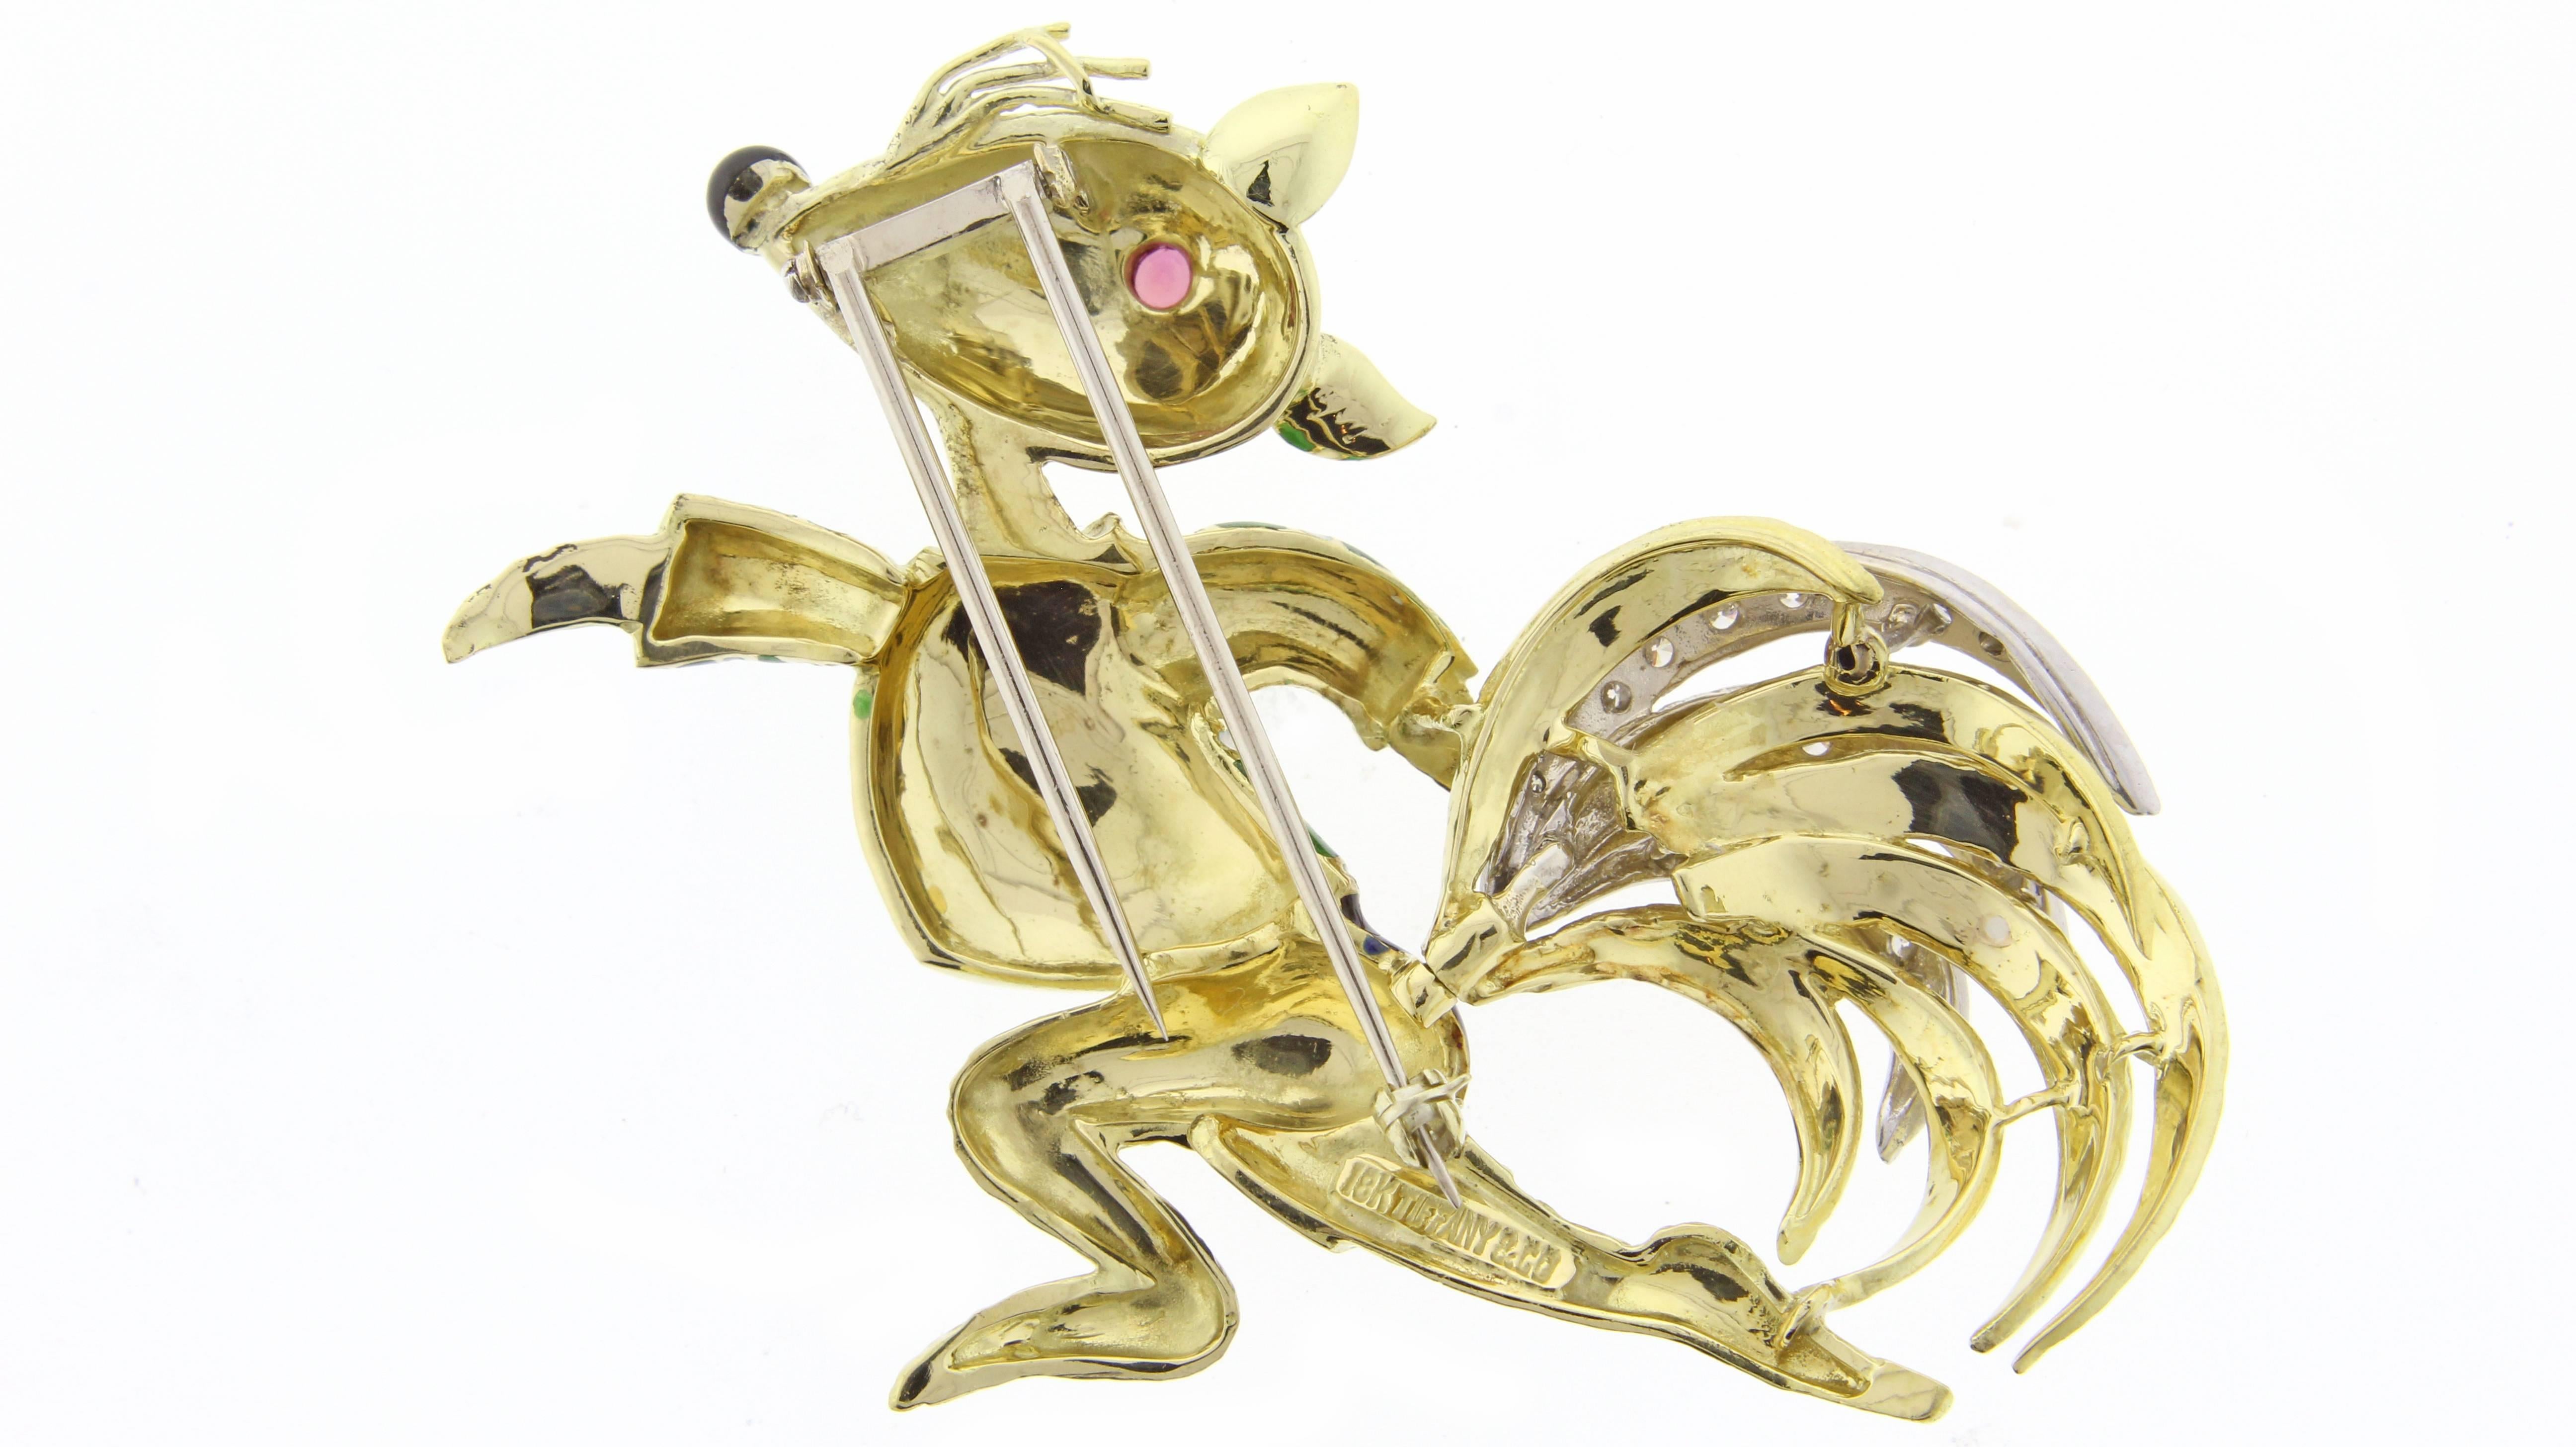 The  brooch depicts a sculpted 18k gold squirrel wearing a green and white guilloché enamel sweater and blue shorts. The tail is highlighted with over one carat of brilliant diamonds. Mounted in platinum and 18k gold, circa 1967, Designed by Donald